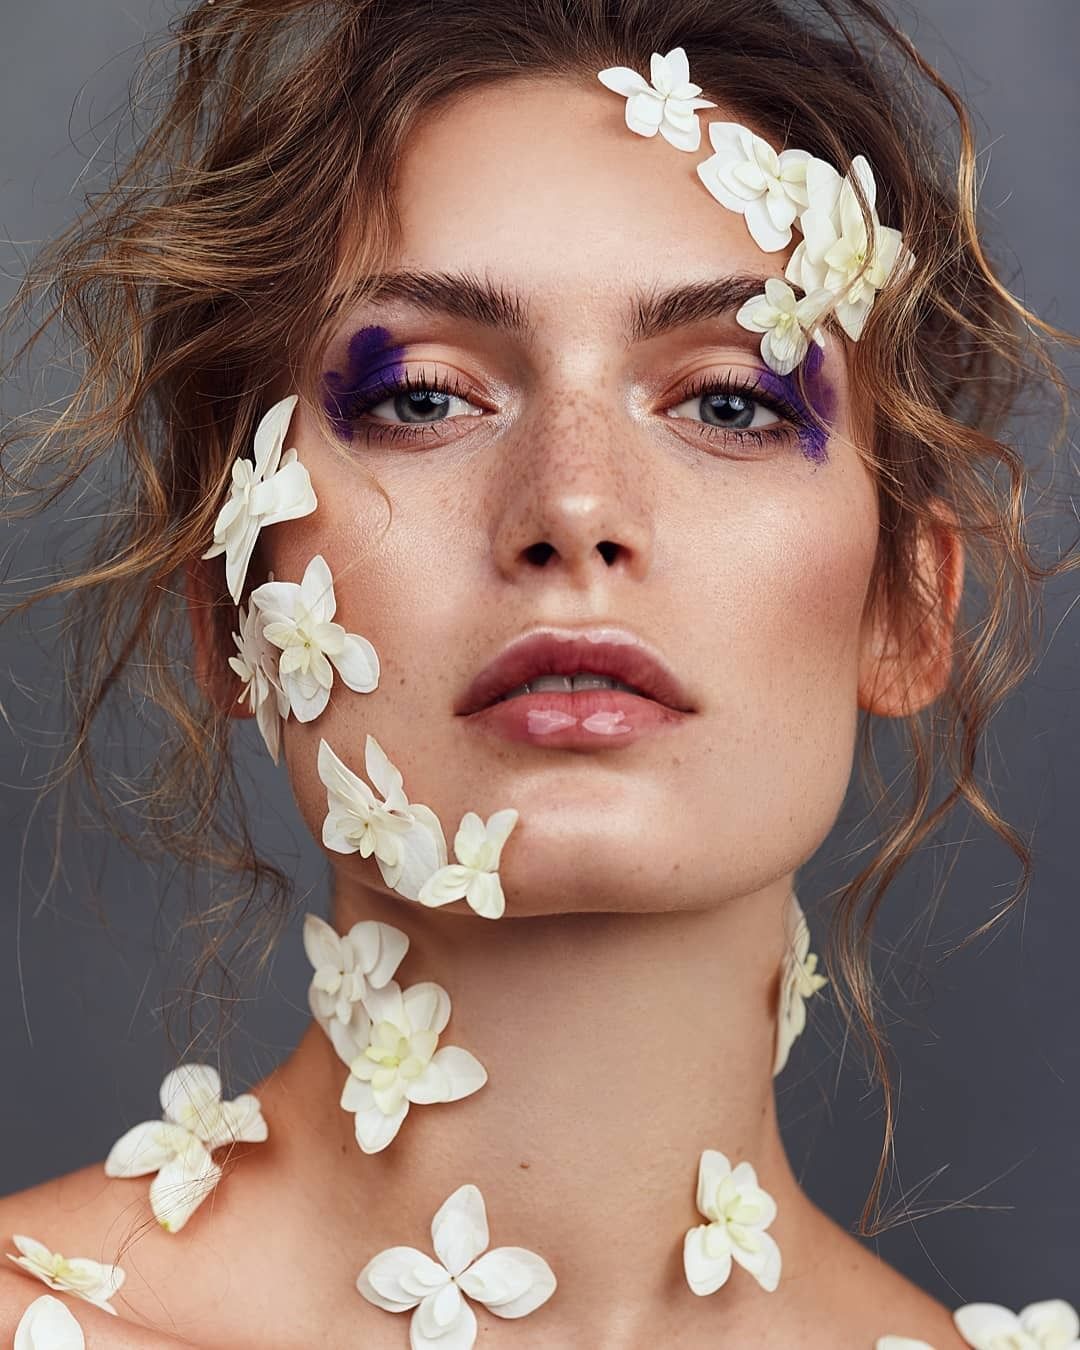 Our Favourite Models - Our Favourite Models -   13 beauty Photoshoot flowers ideas